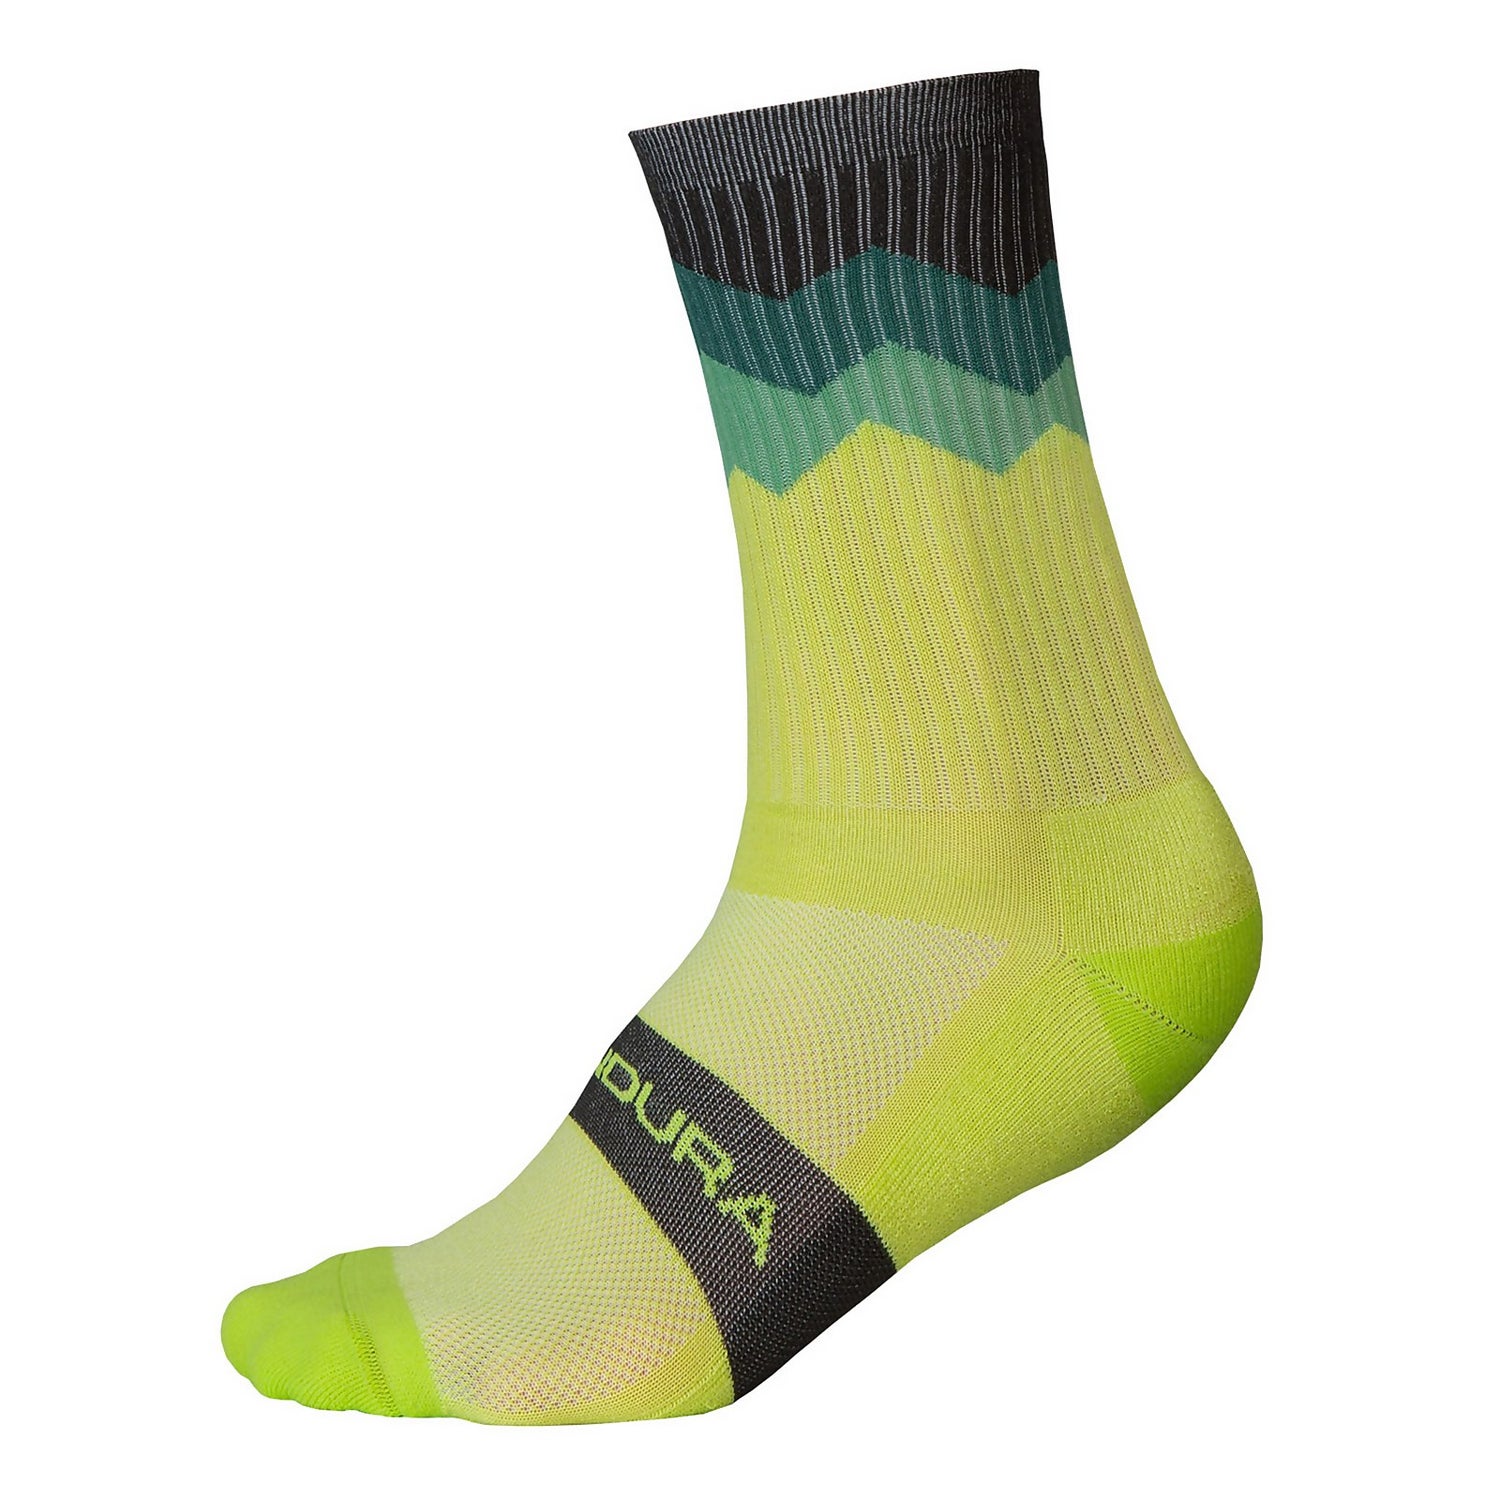 Jagged Sock - Lime Green - S-M